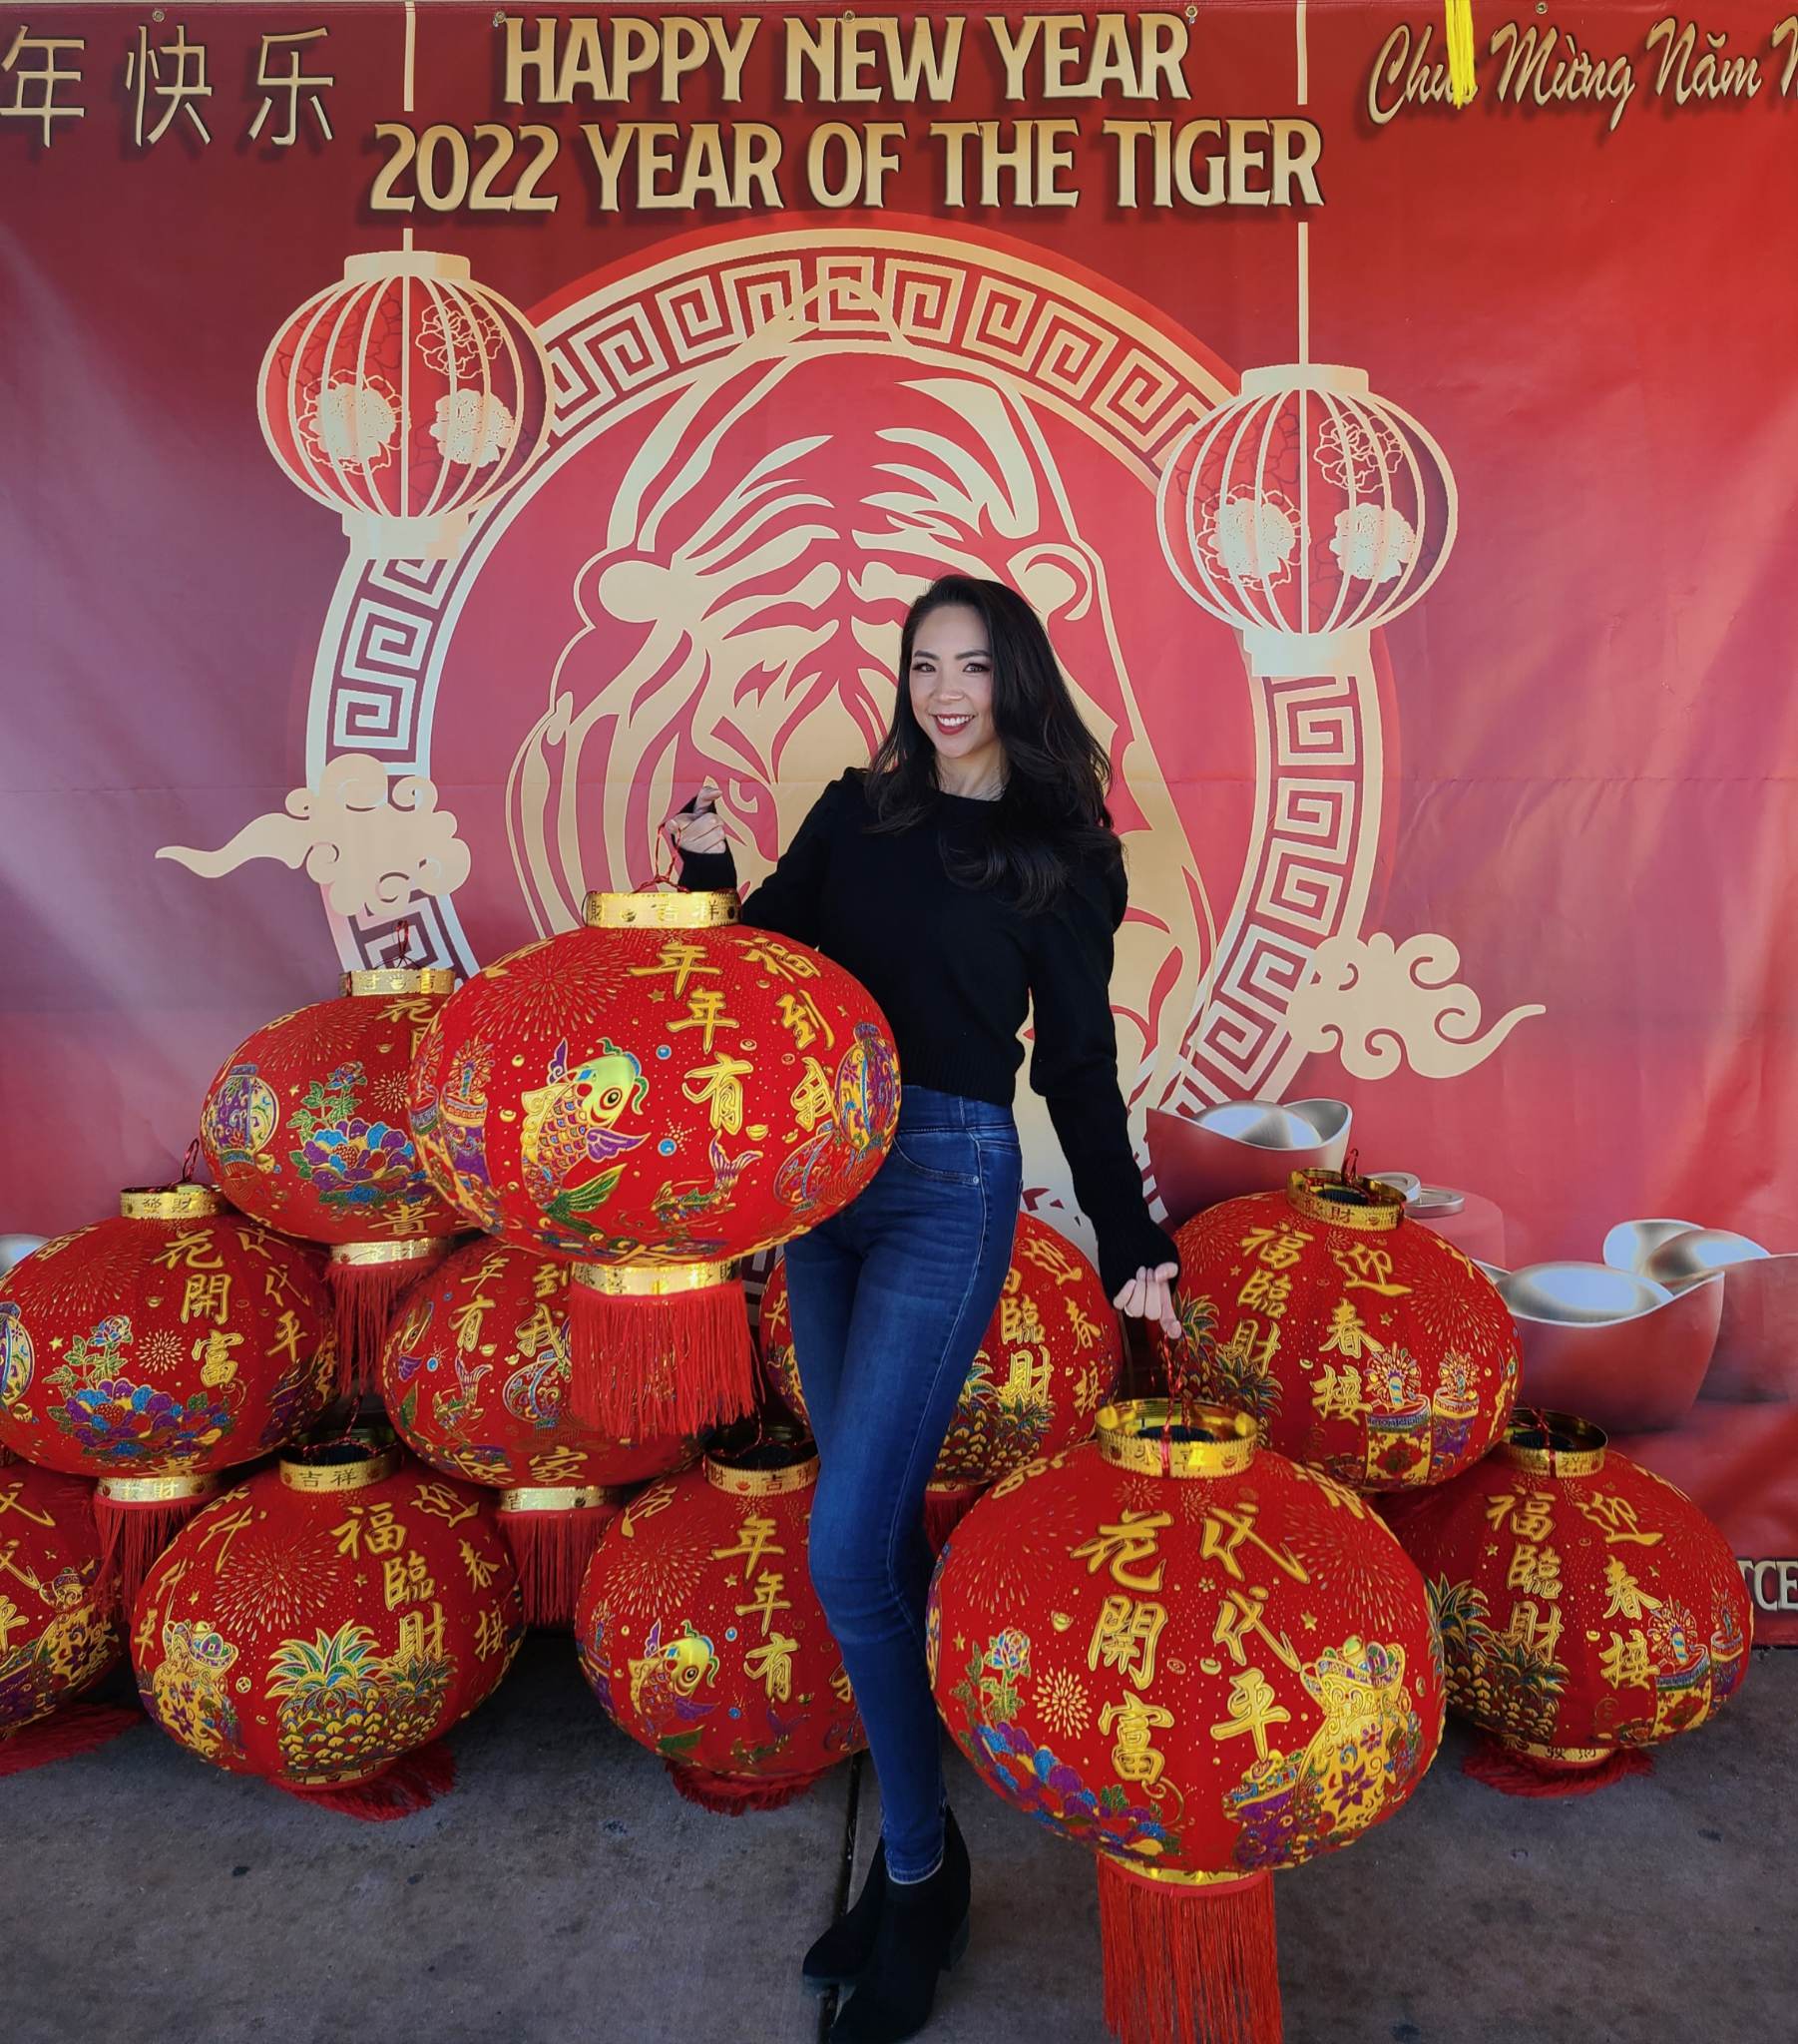 Mimi Luong stands in front of a banner wall titled, "Happy New Year: 2022 Year of the Tiger" and holds large, red cultural lanterns with gold writing in Chinese.